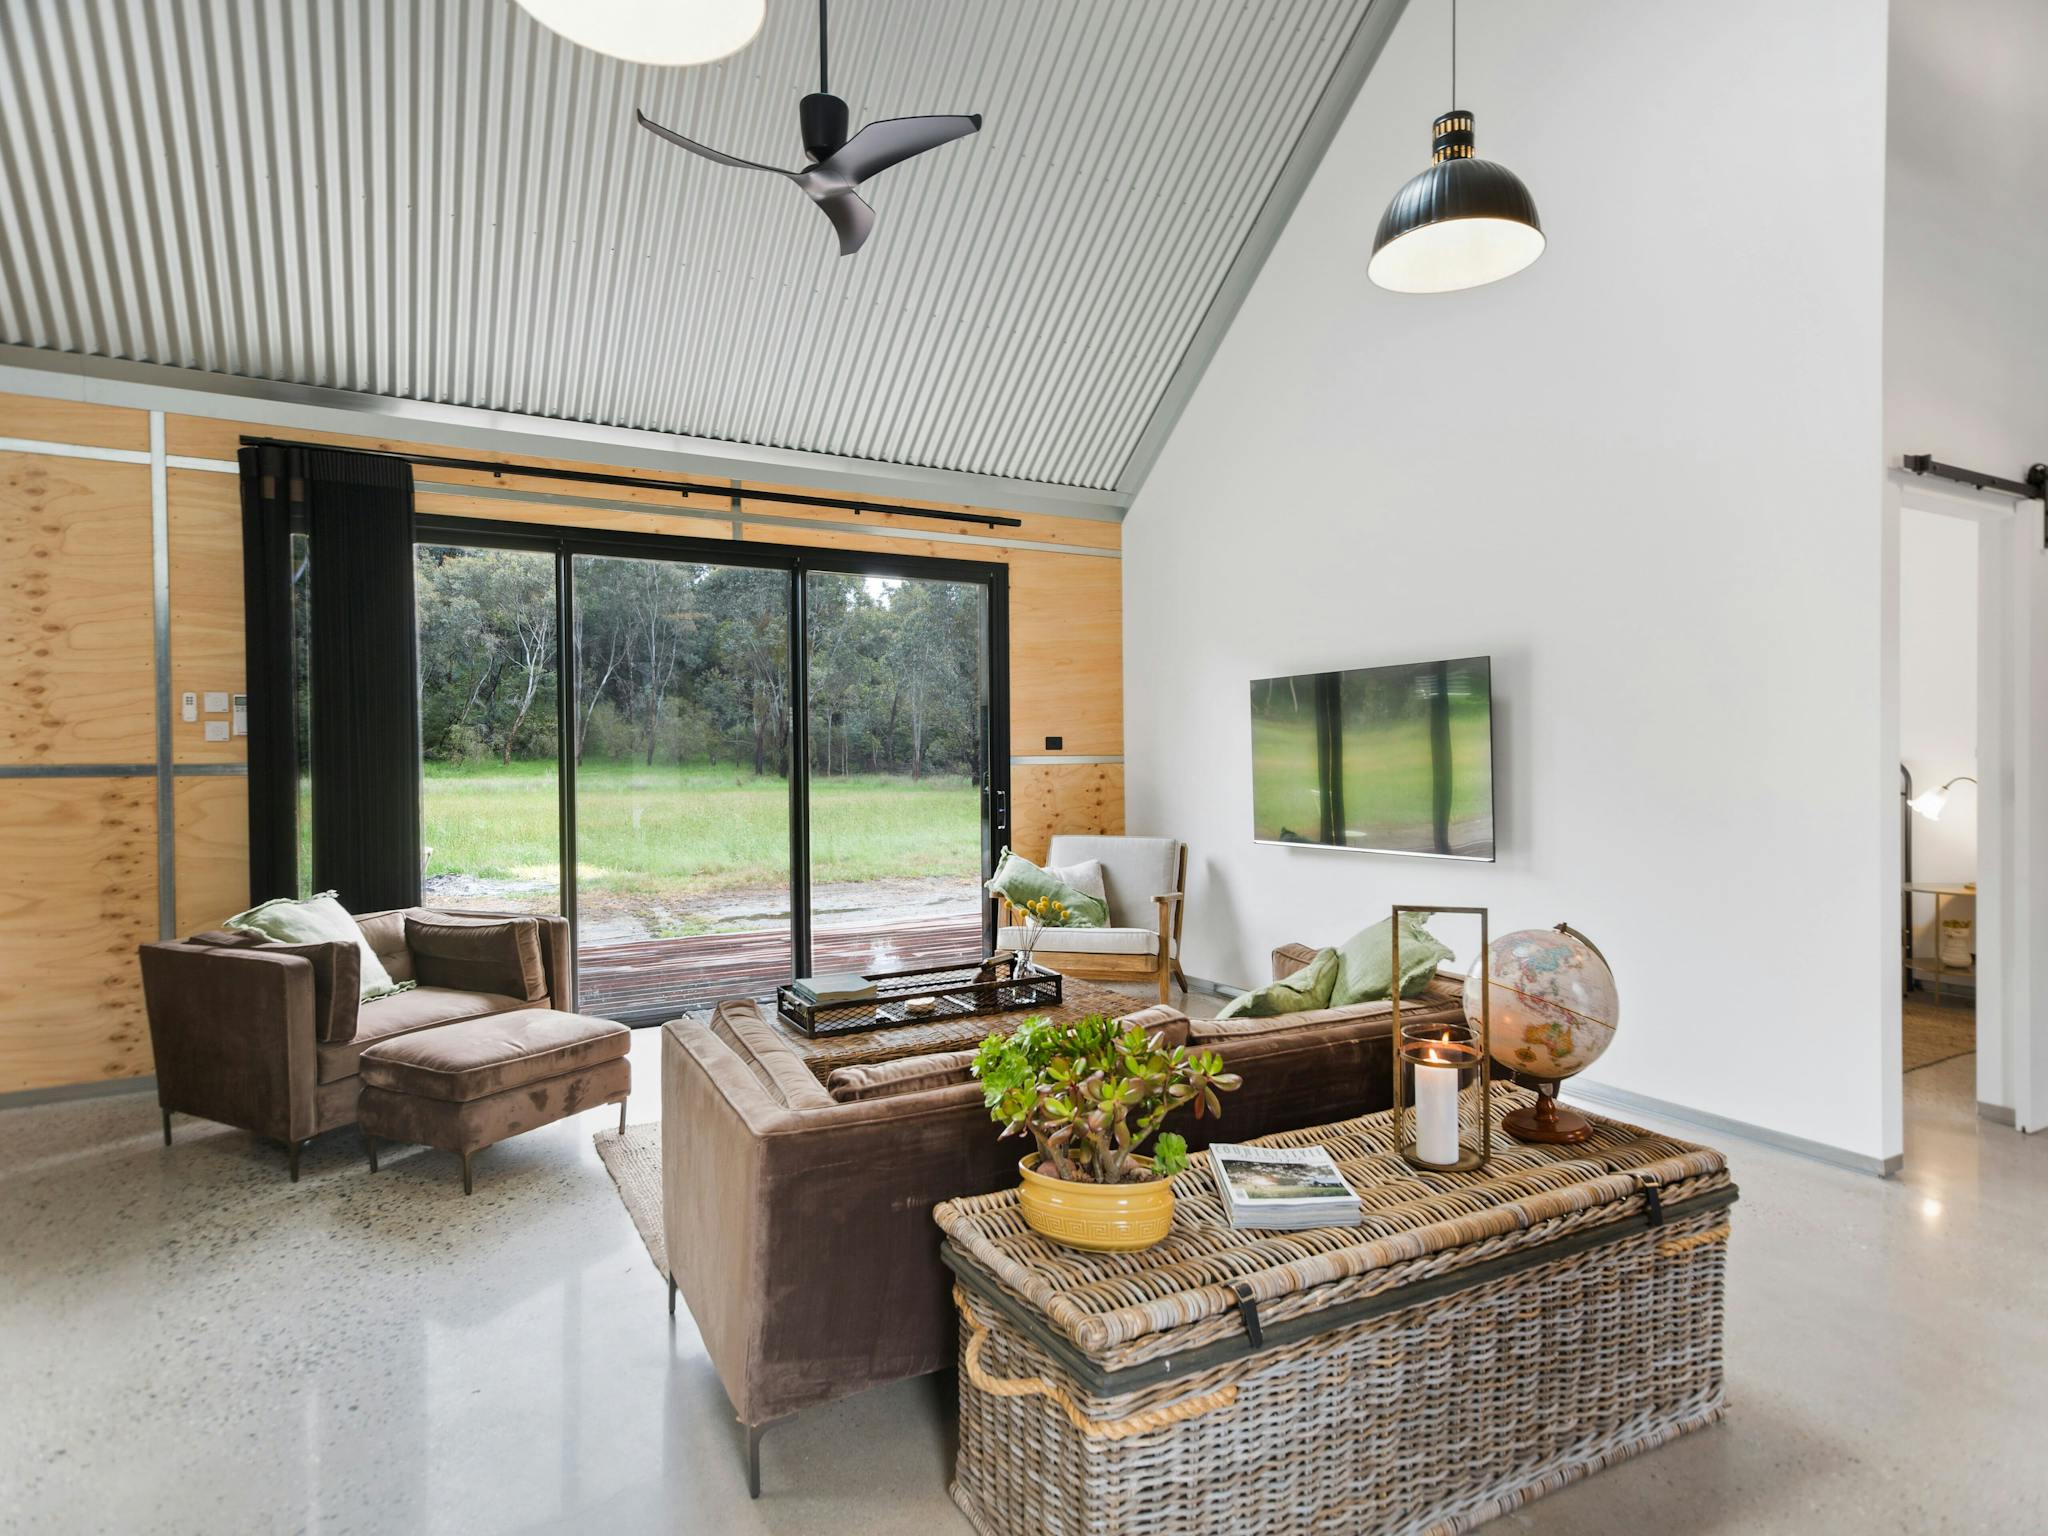 BIG Shed Lounge area with large sliding door , cathedral ceiling and fan